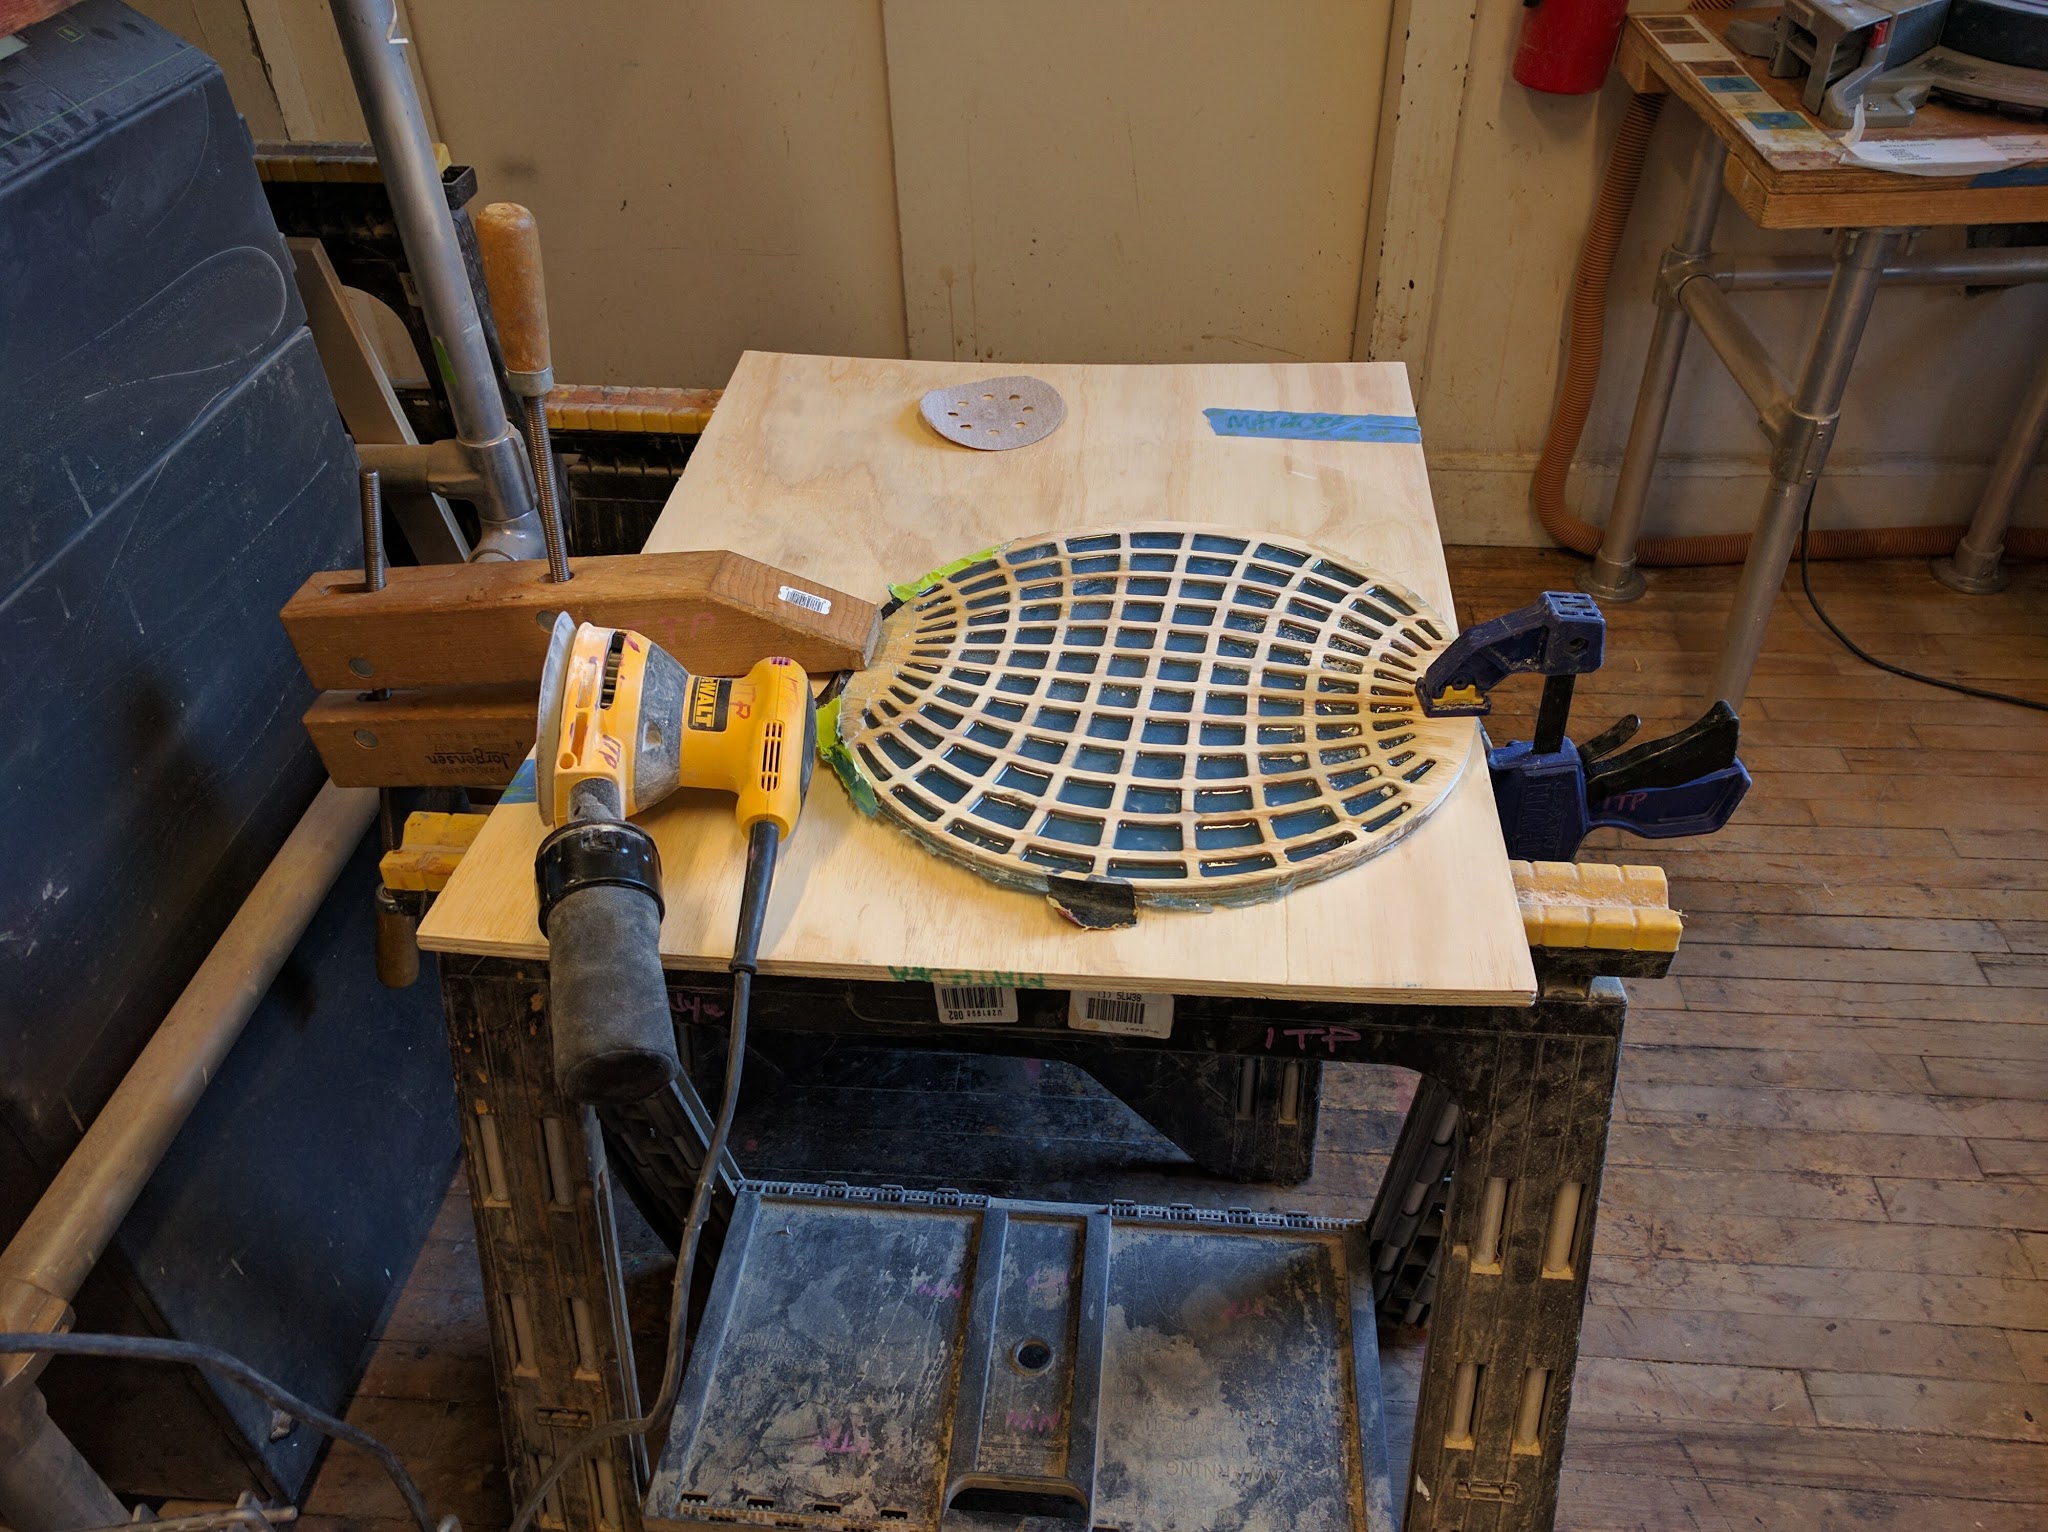 top of the table set up for sanding after the resin has dried.